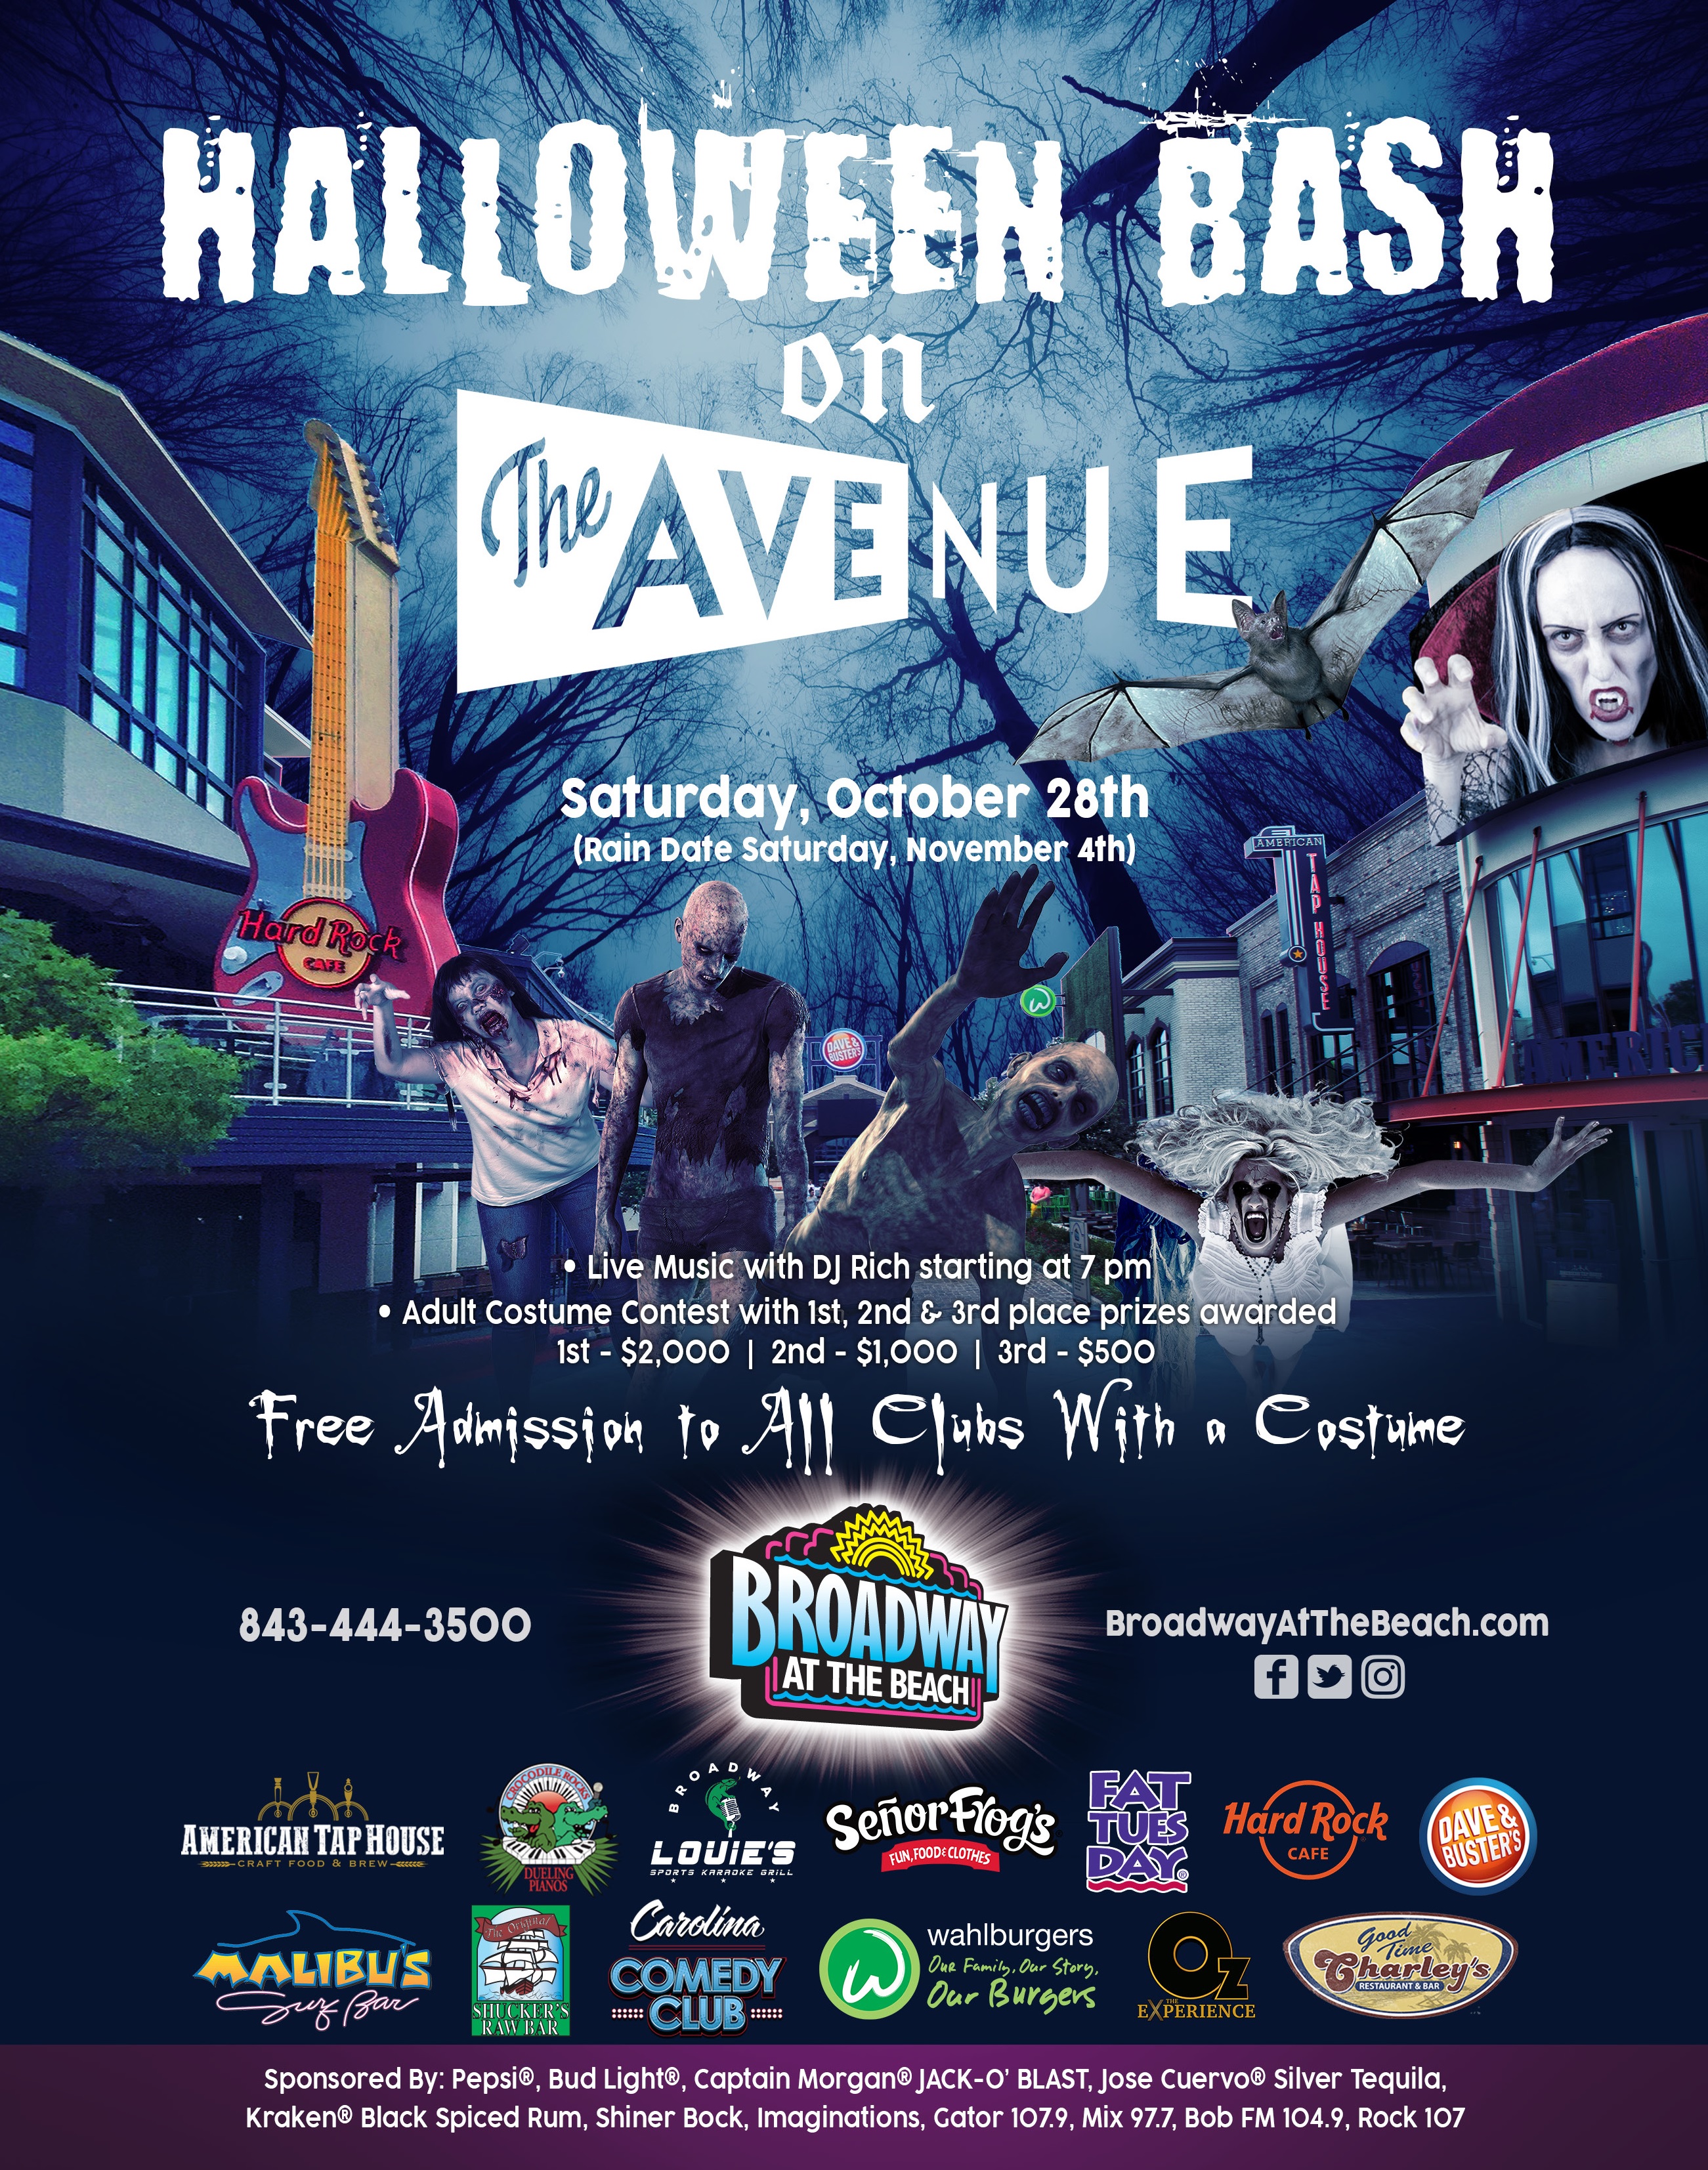 Halloween Bash on The Avenue Broadway at the Beach